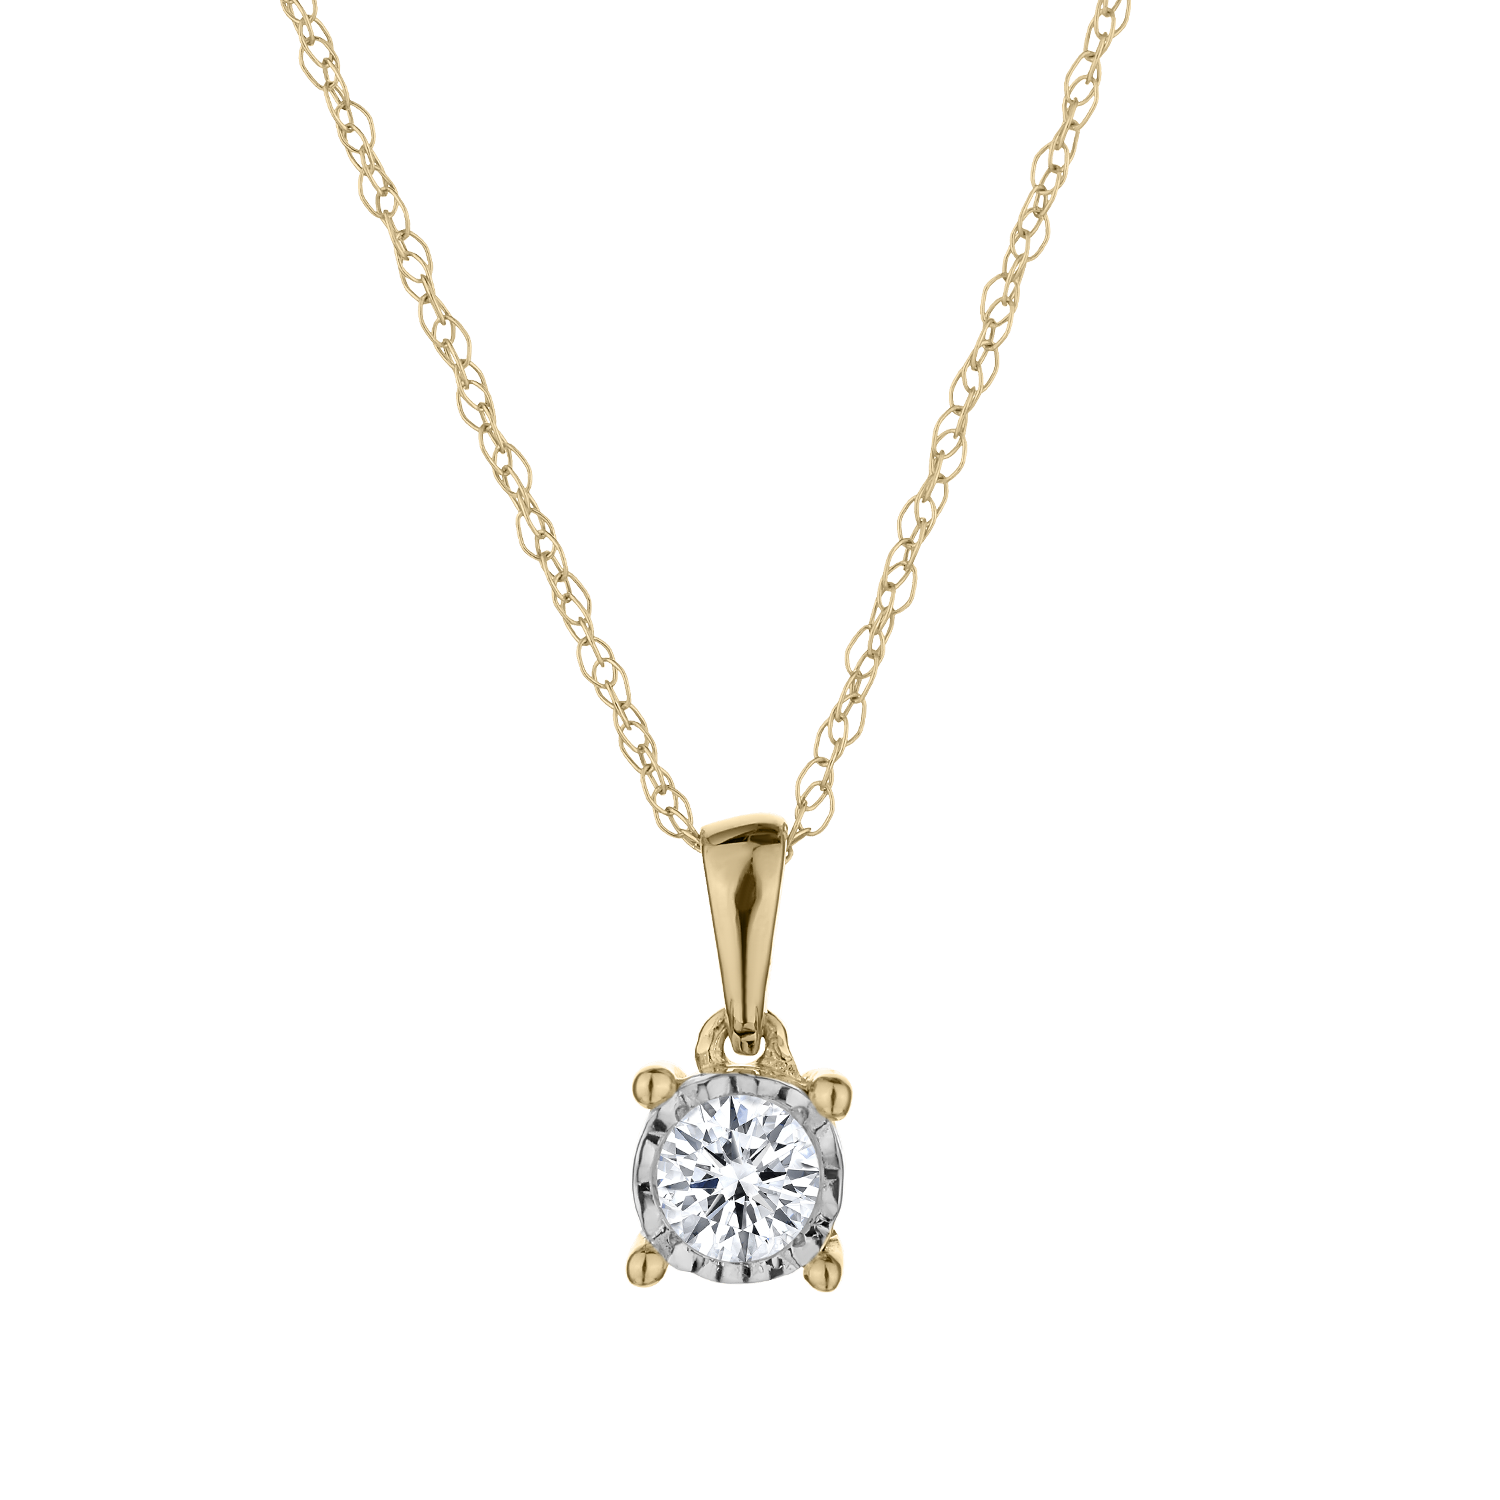 .15 Carat Diamond "Miracle" Pendant,  14kt Yellow Gold. Necklaces and Pendants. Griffin Jewellery Designs.